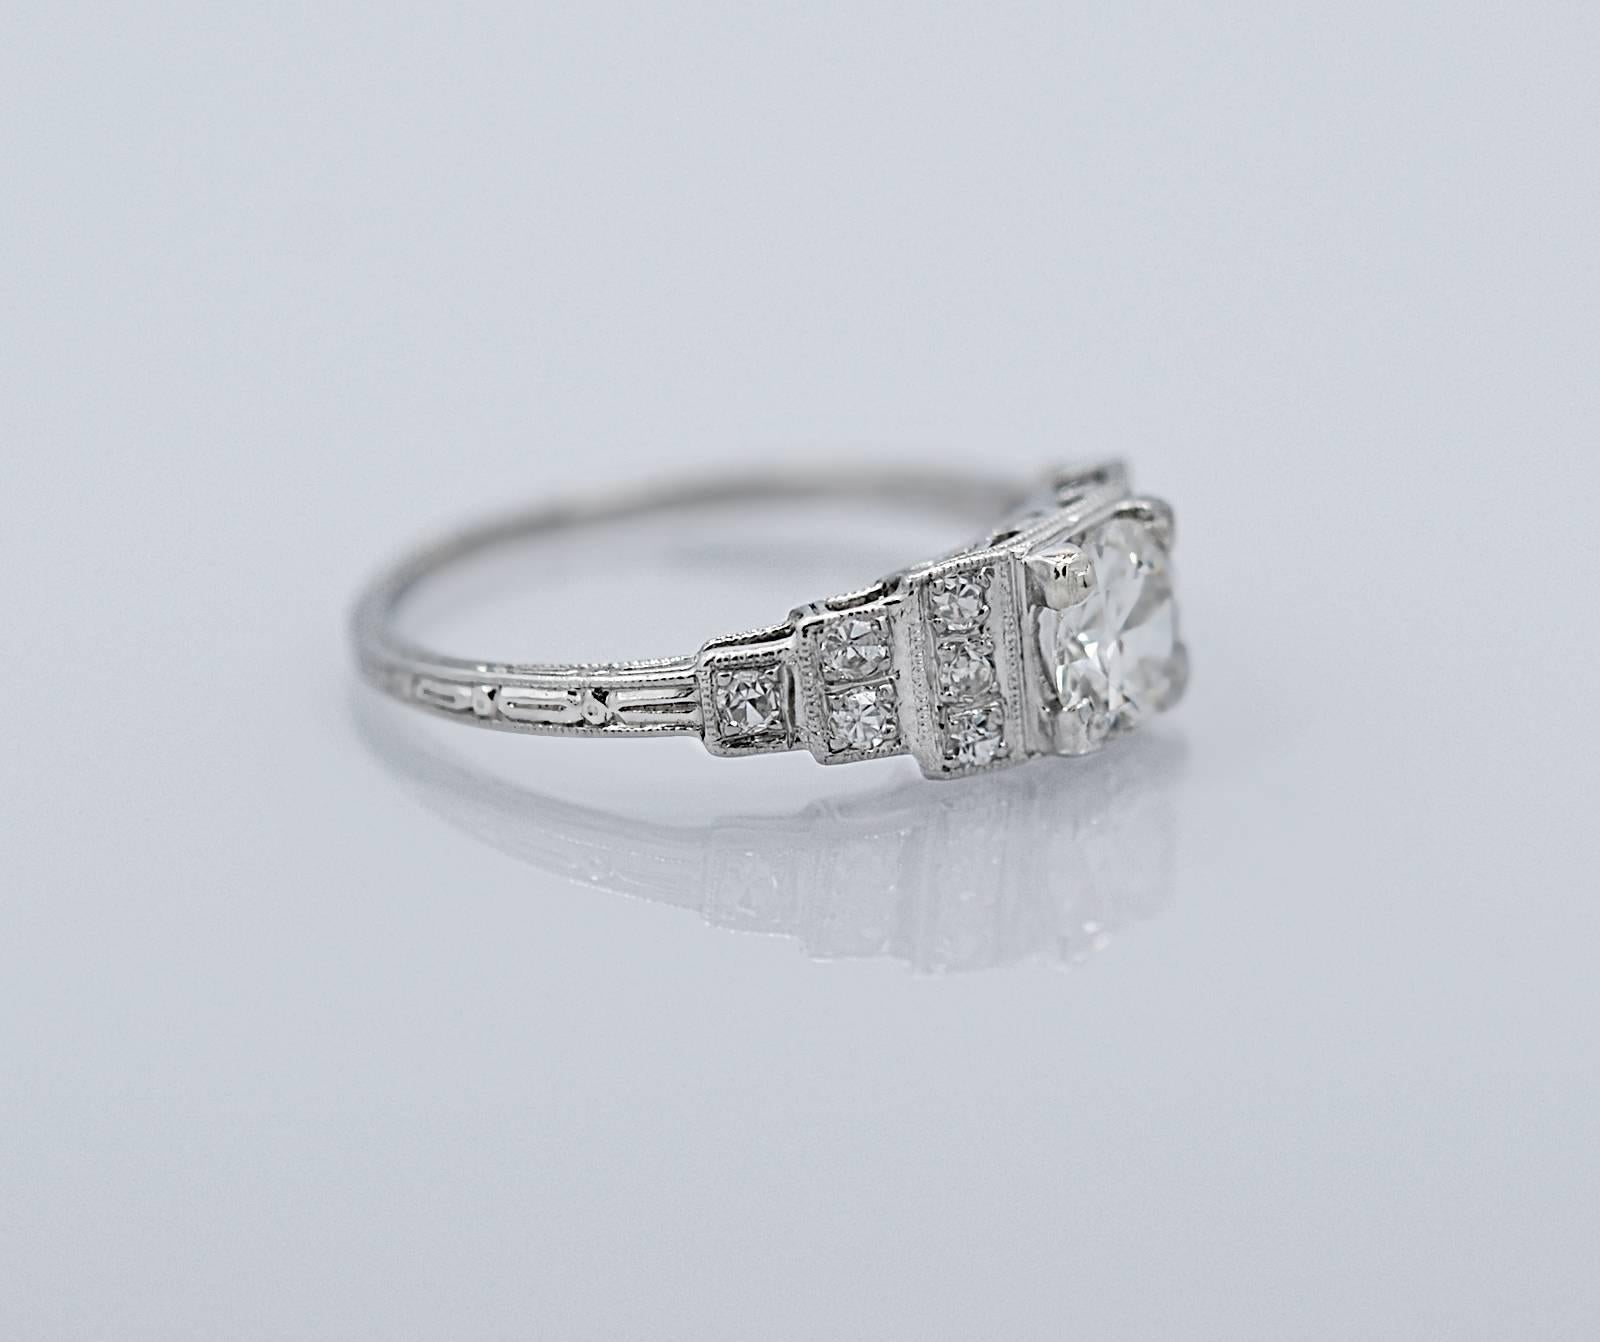 A traditional Art Deco Antique engagement ring featuring a .50ct. apx. European cut diamond with VS2 clarity and I color. The .15ct. apx. T.W. single cut diamonds, decorating the sides in a step down design, are VS2-SI1 clarity and G-H color.